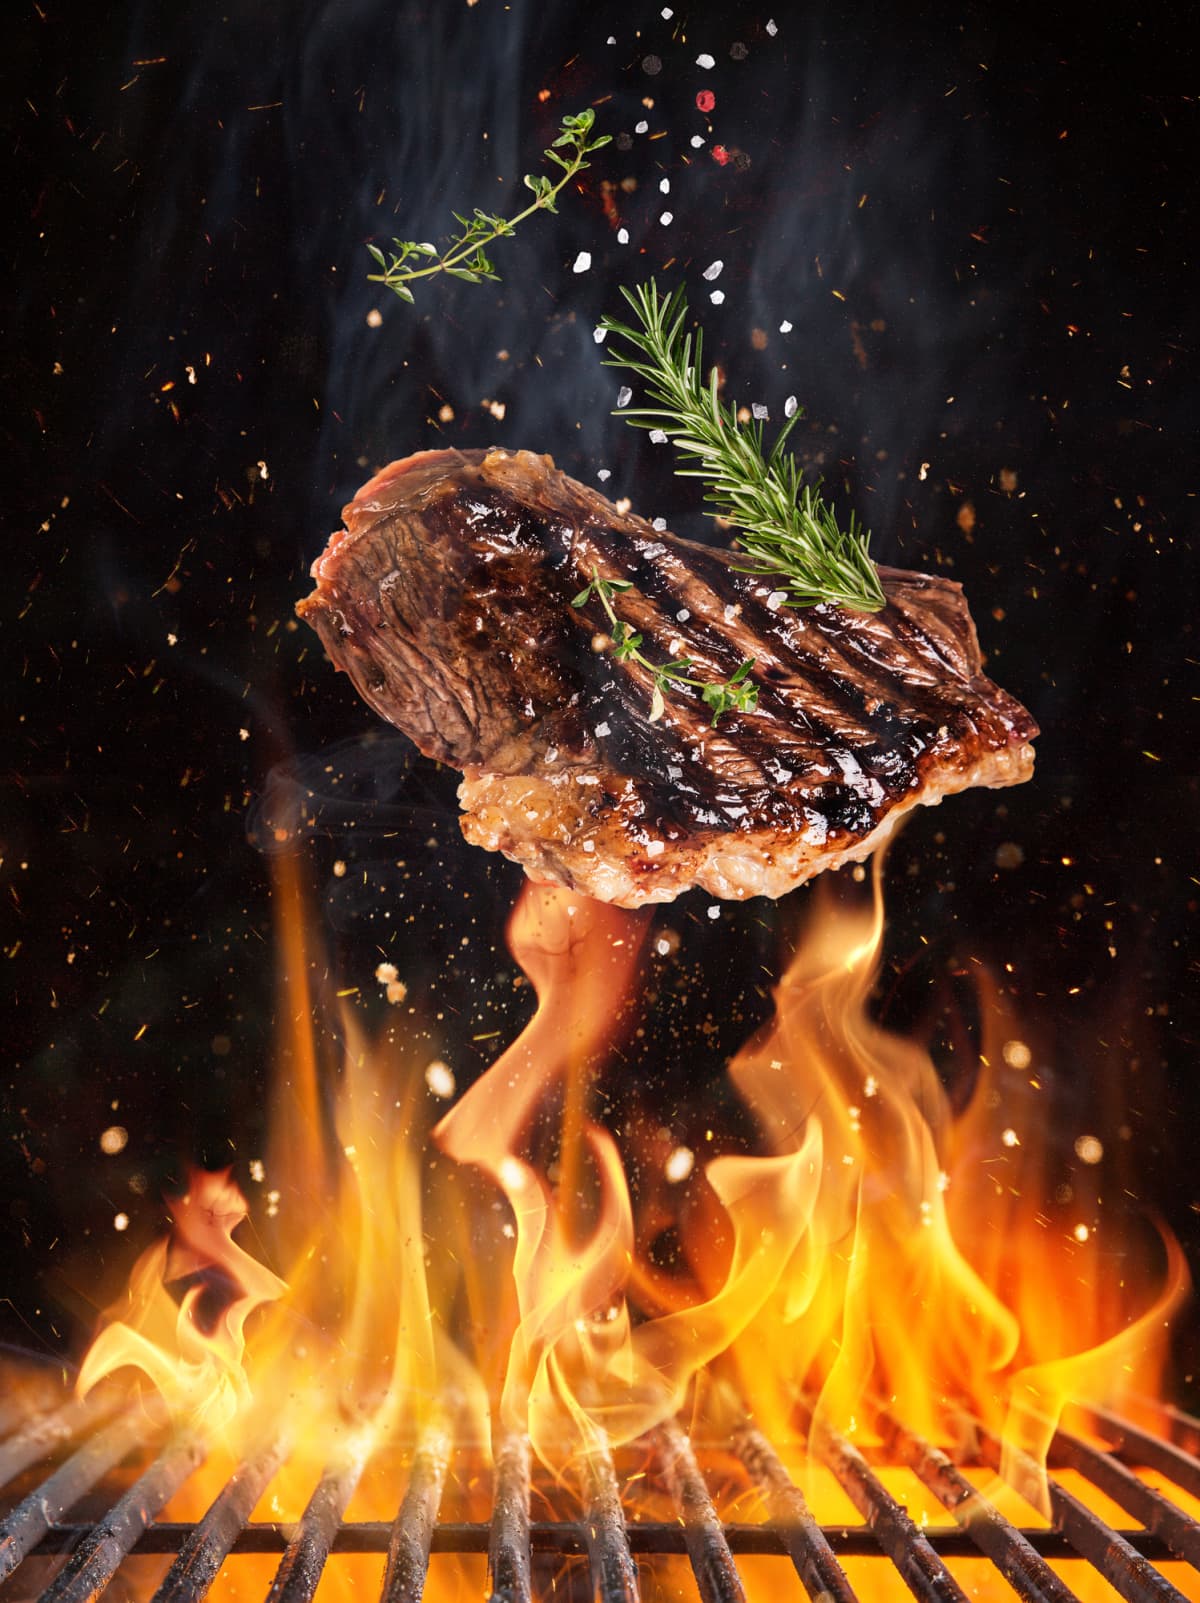 Tasty beef steaks flying above cast iron grate with fire flames. Freeze motion barbecue concept.